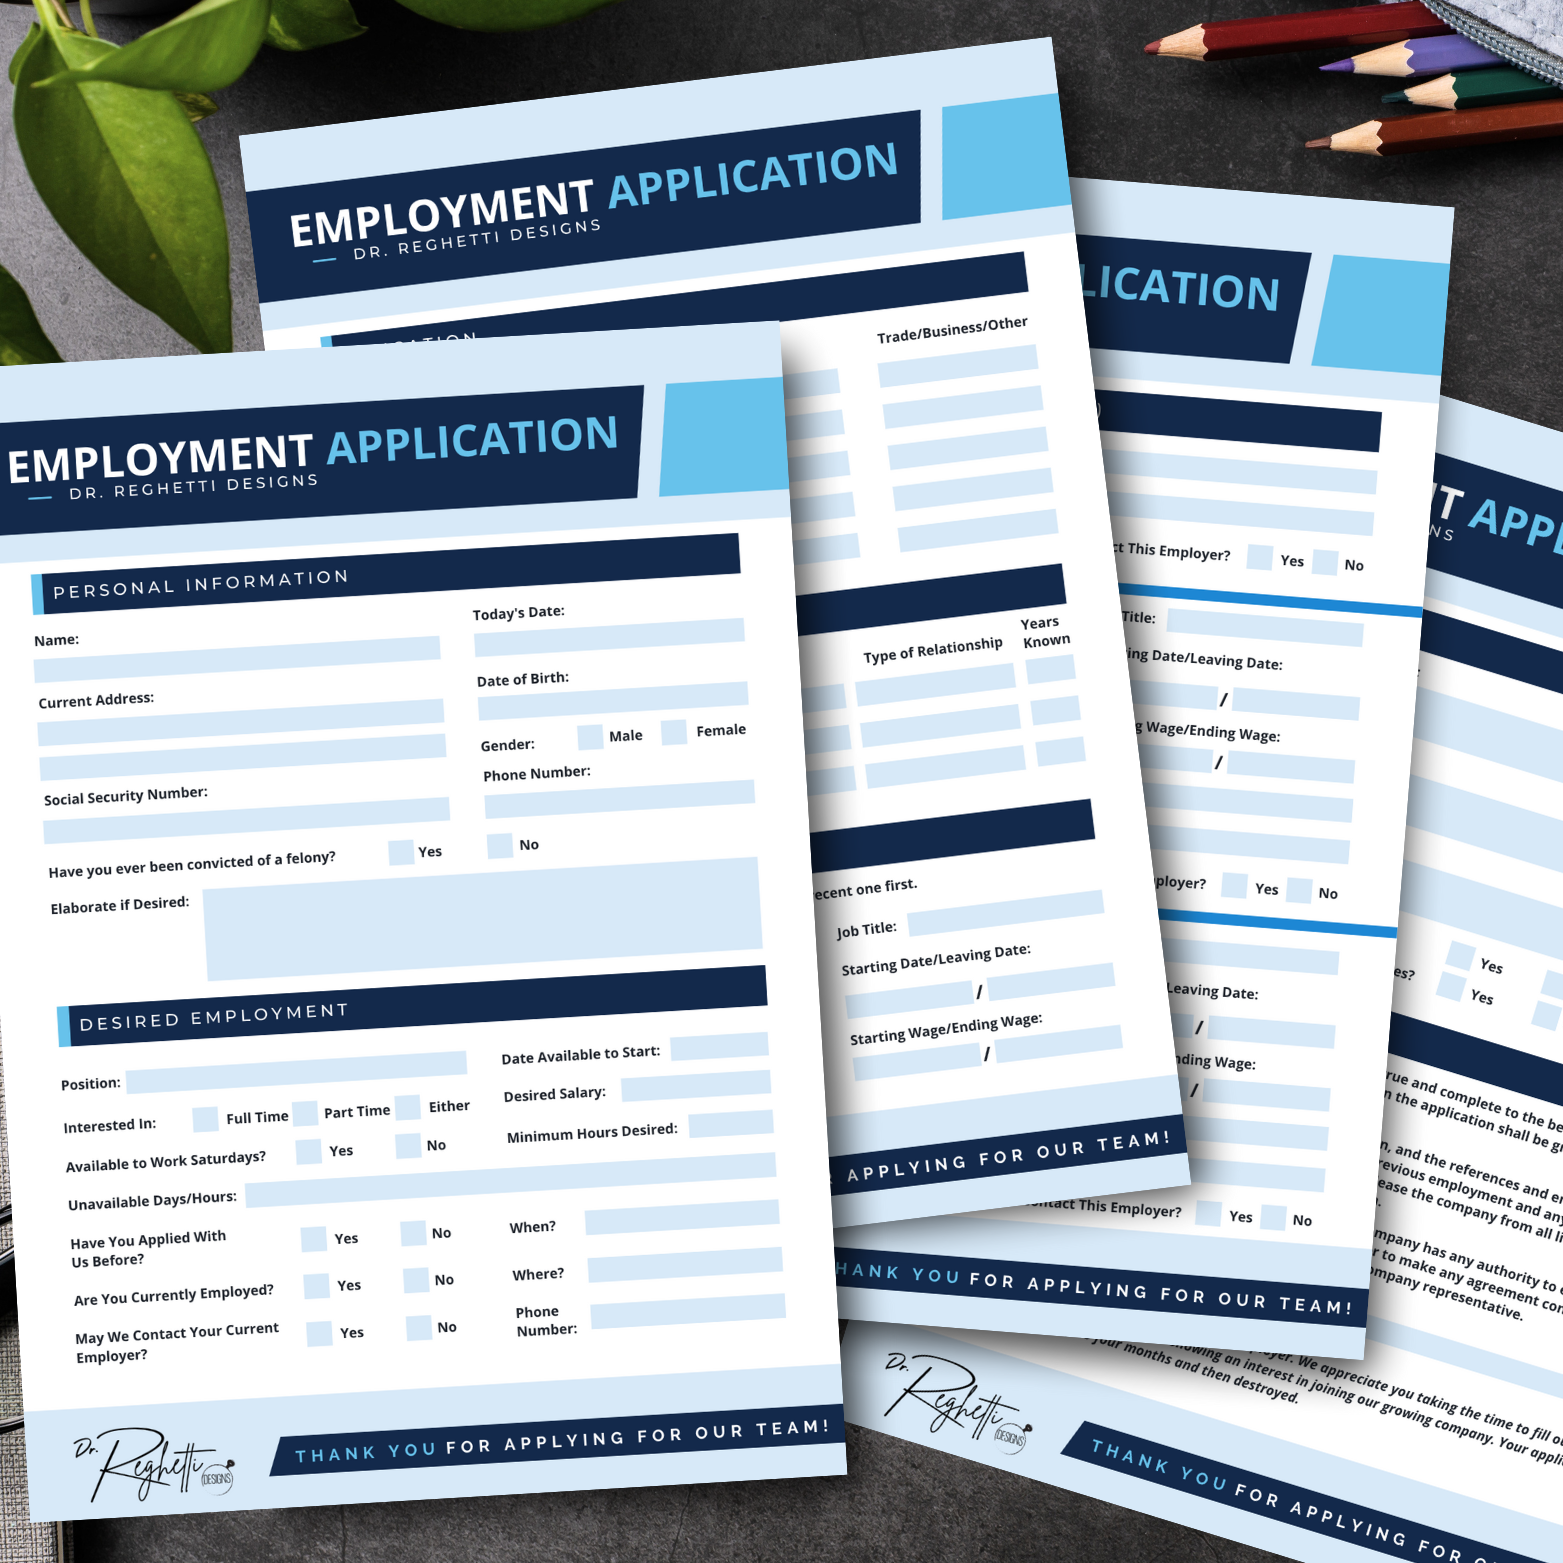 employment application for optometry private practice